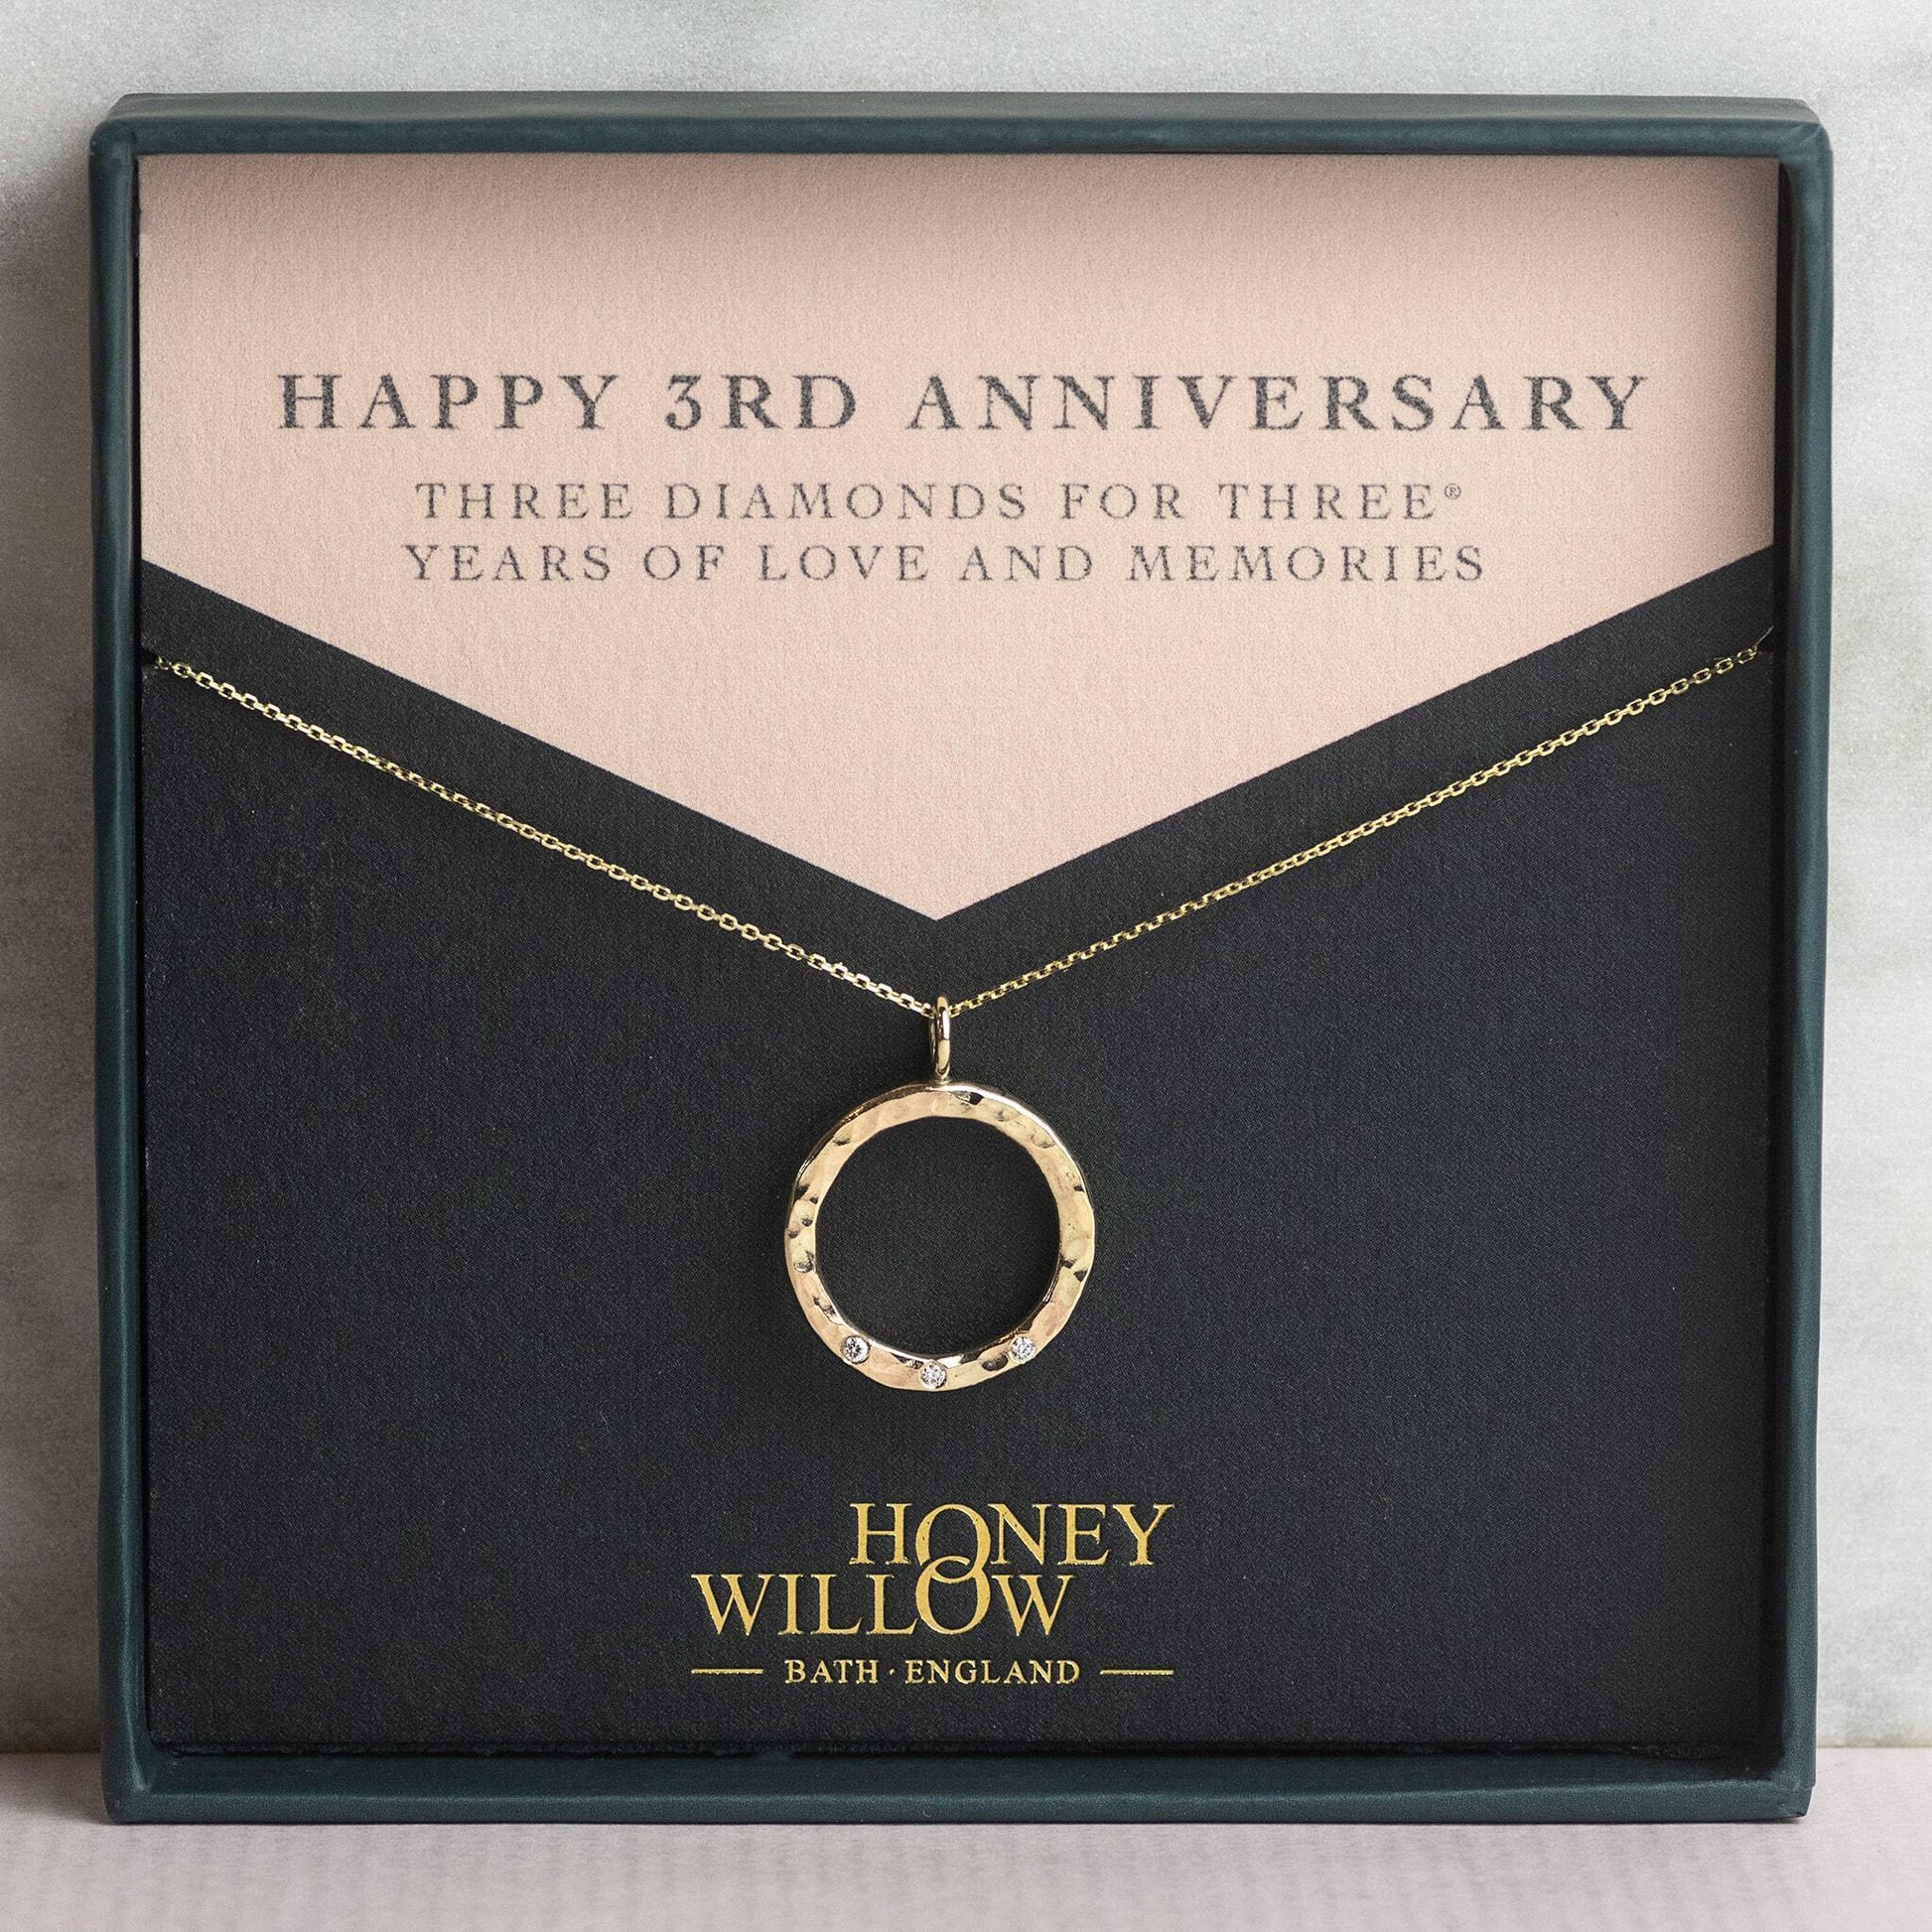 3rd Anniversary Gift - Recycled 9kt Gold Diamond Halo Necklace - 3 Diamonds for 3® Years